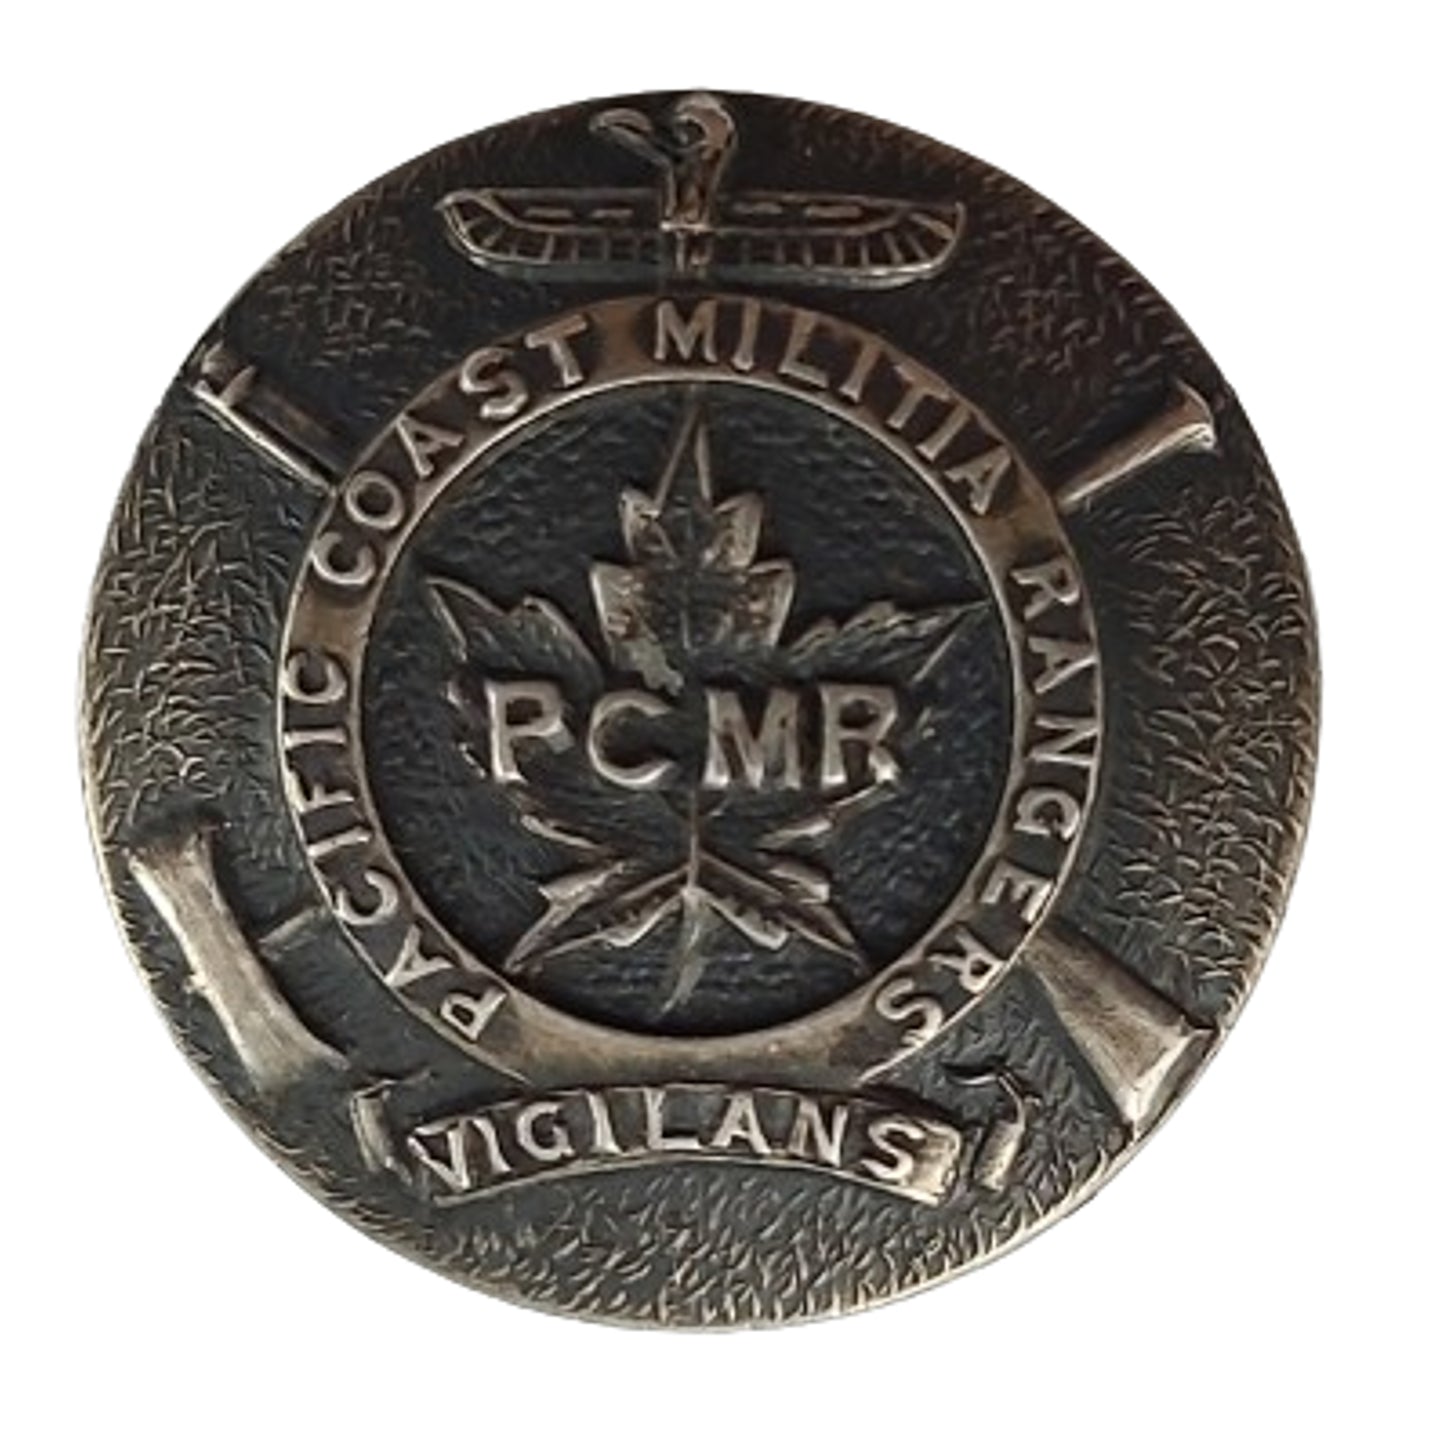 WW2 PCMR Pacific Coast Mountain Rangers Sterling Lapel Badge